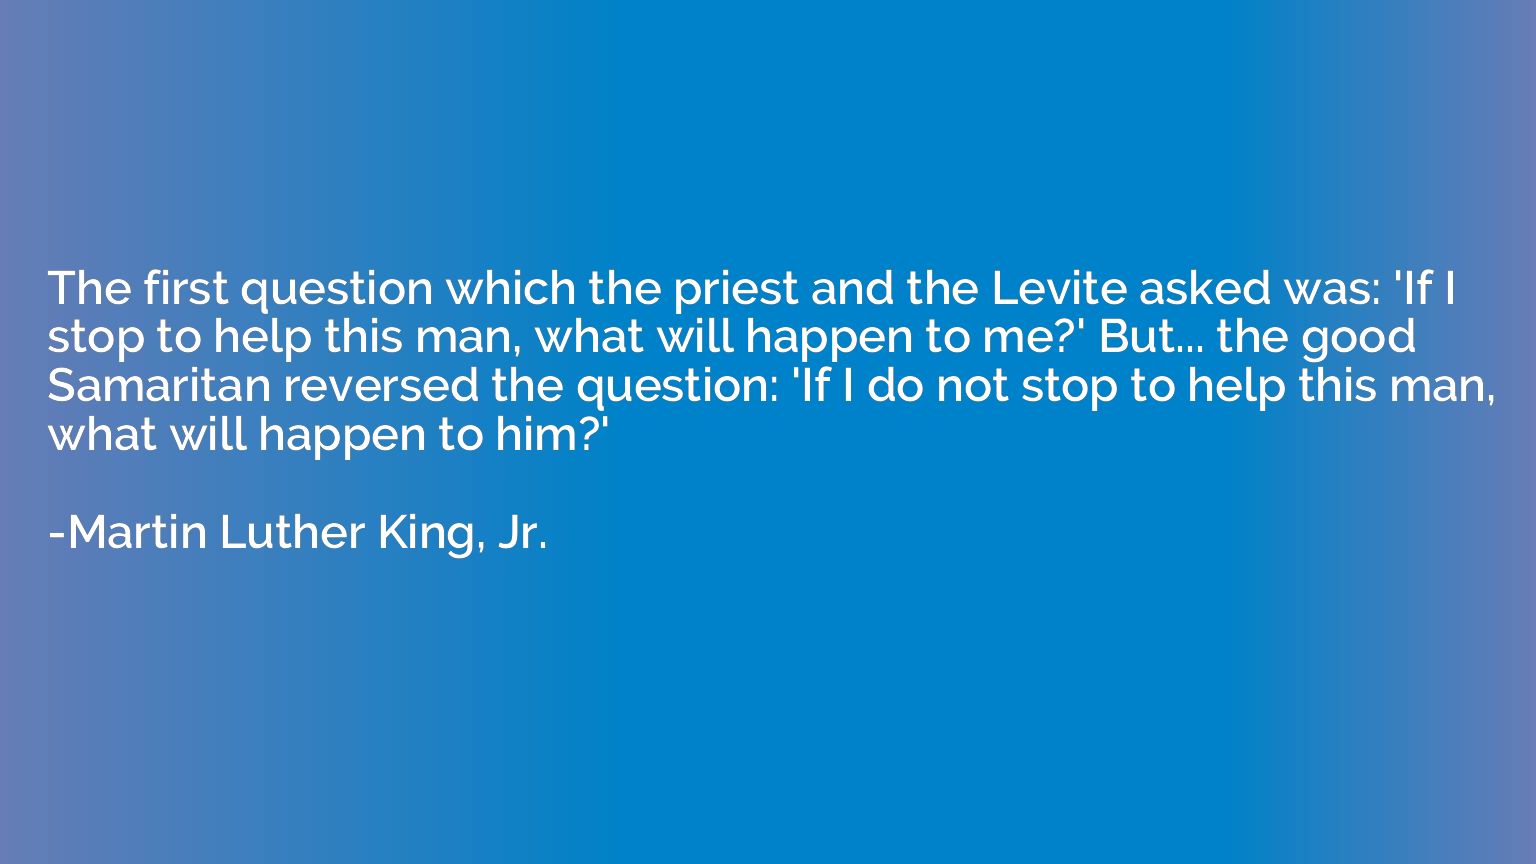 The first question which the priest and the Levite asked was